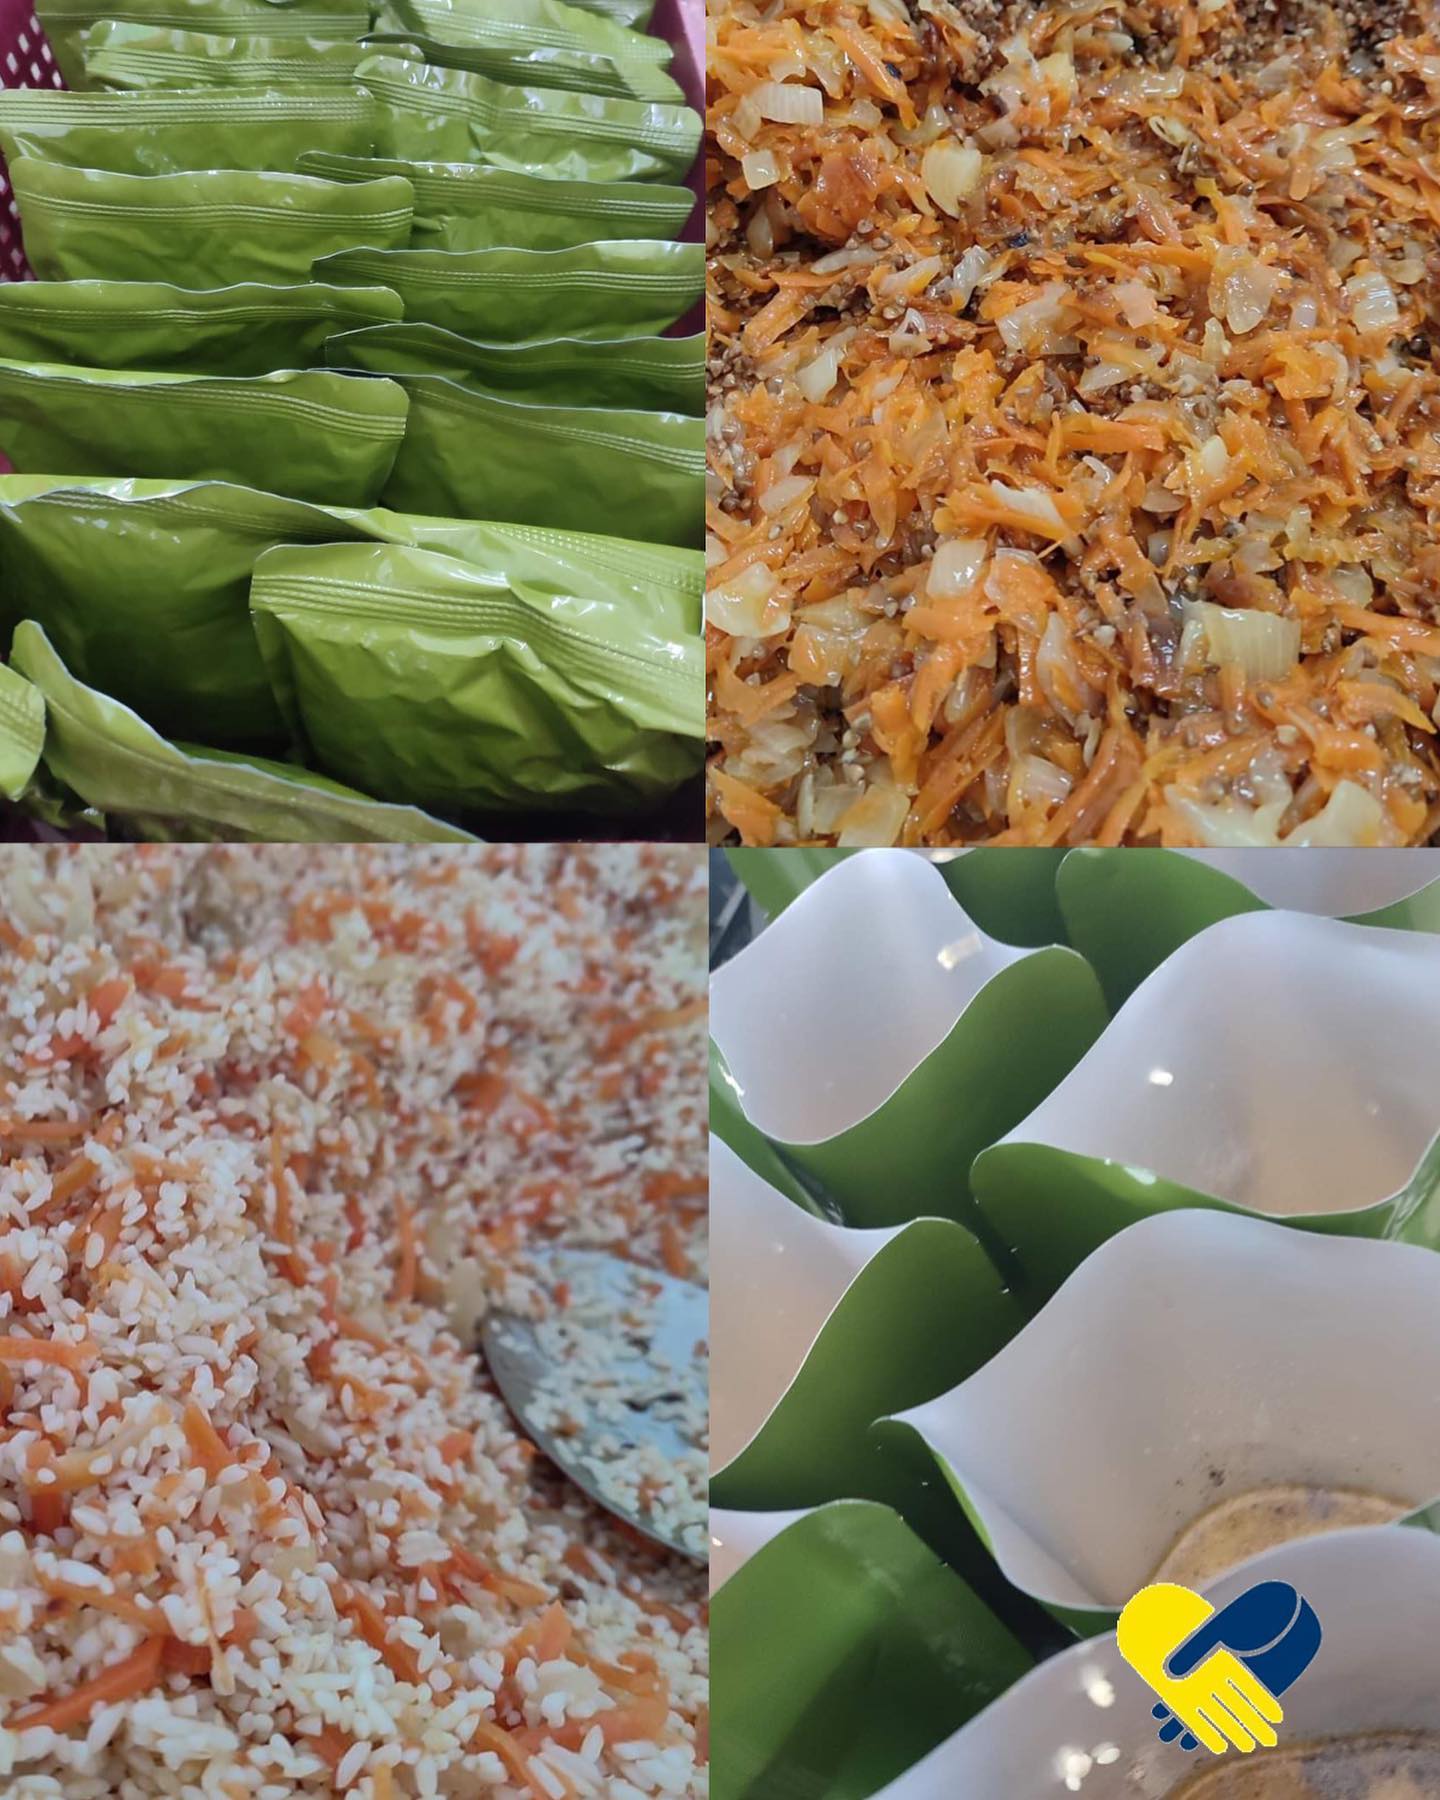 a collage of photos showing different types of food.